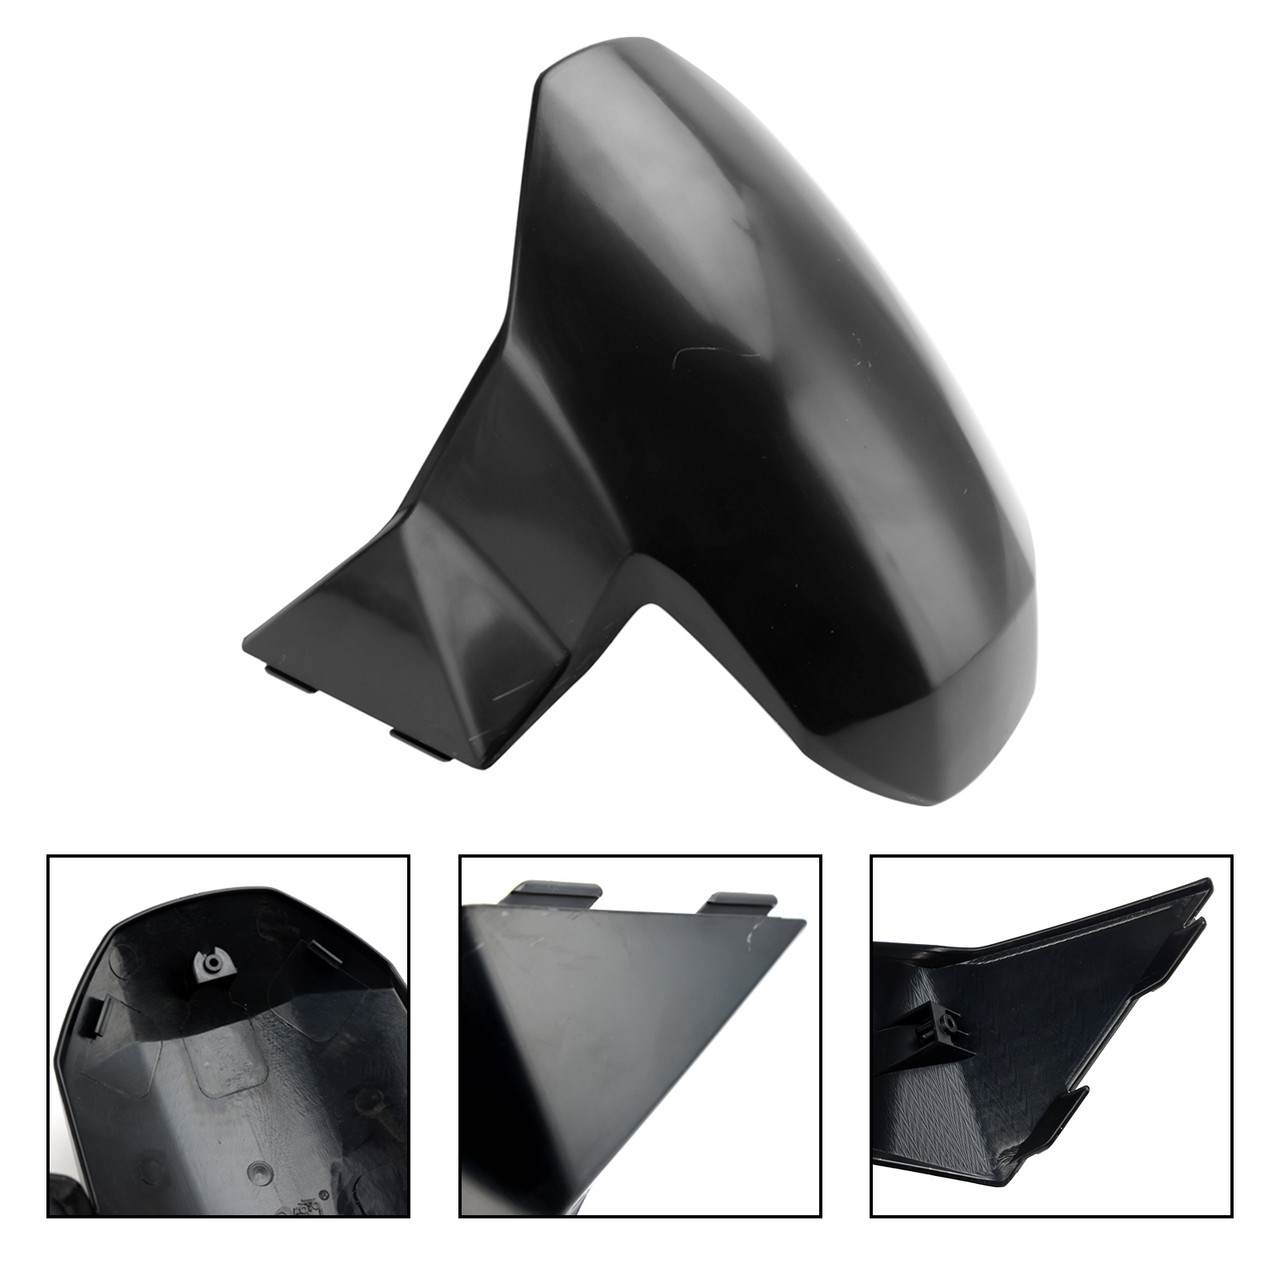 Unpainted ABS Front Fender Cover Fairing Cowl for Honda X-ADV 750 2021-2023